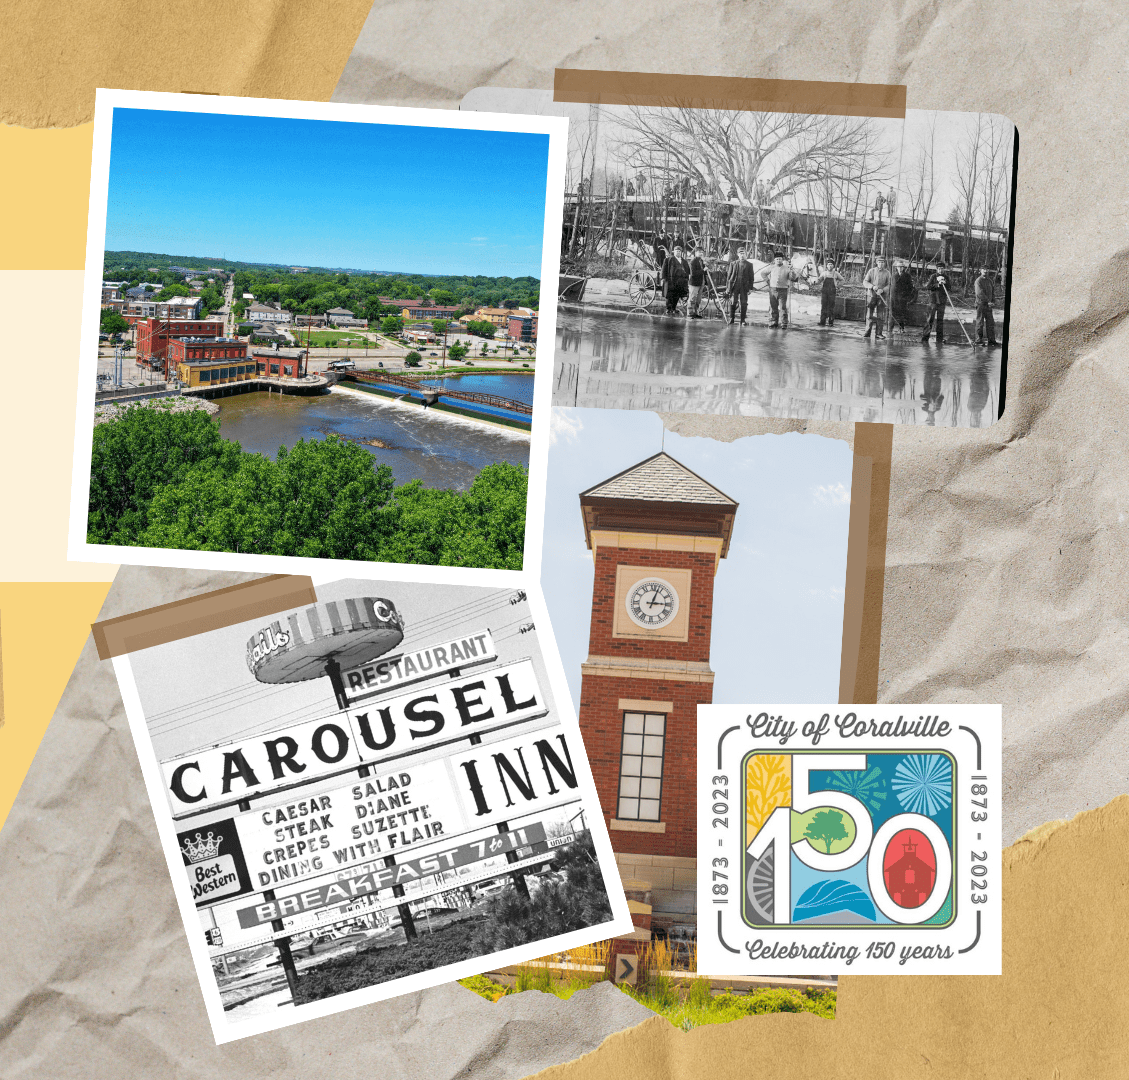 City of Coralville Celebrating 150 years 1872-2023 (logo) and historical images of Coralville.